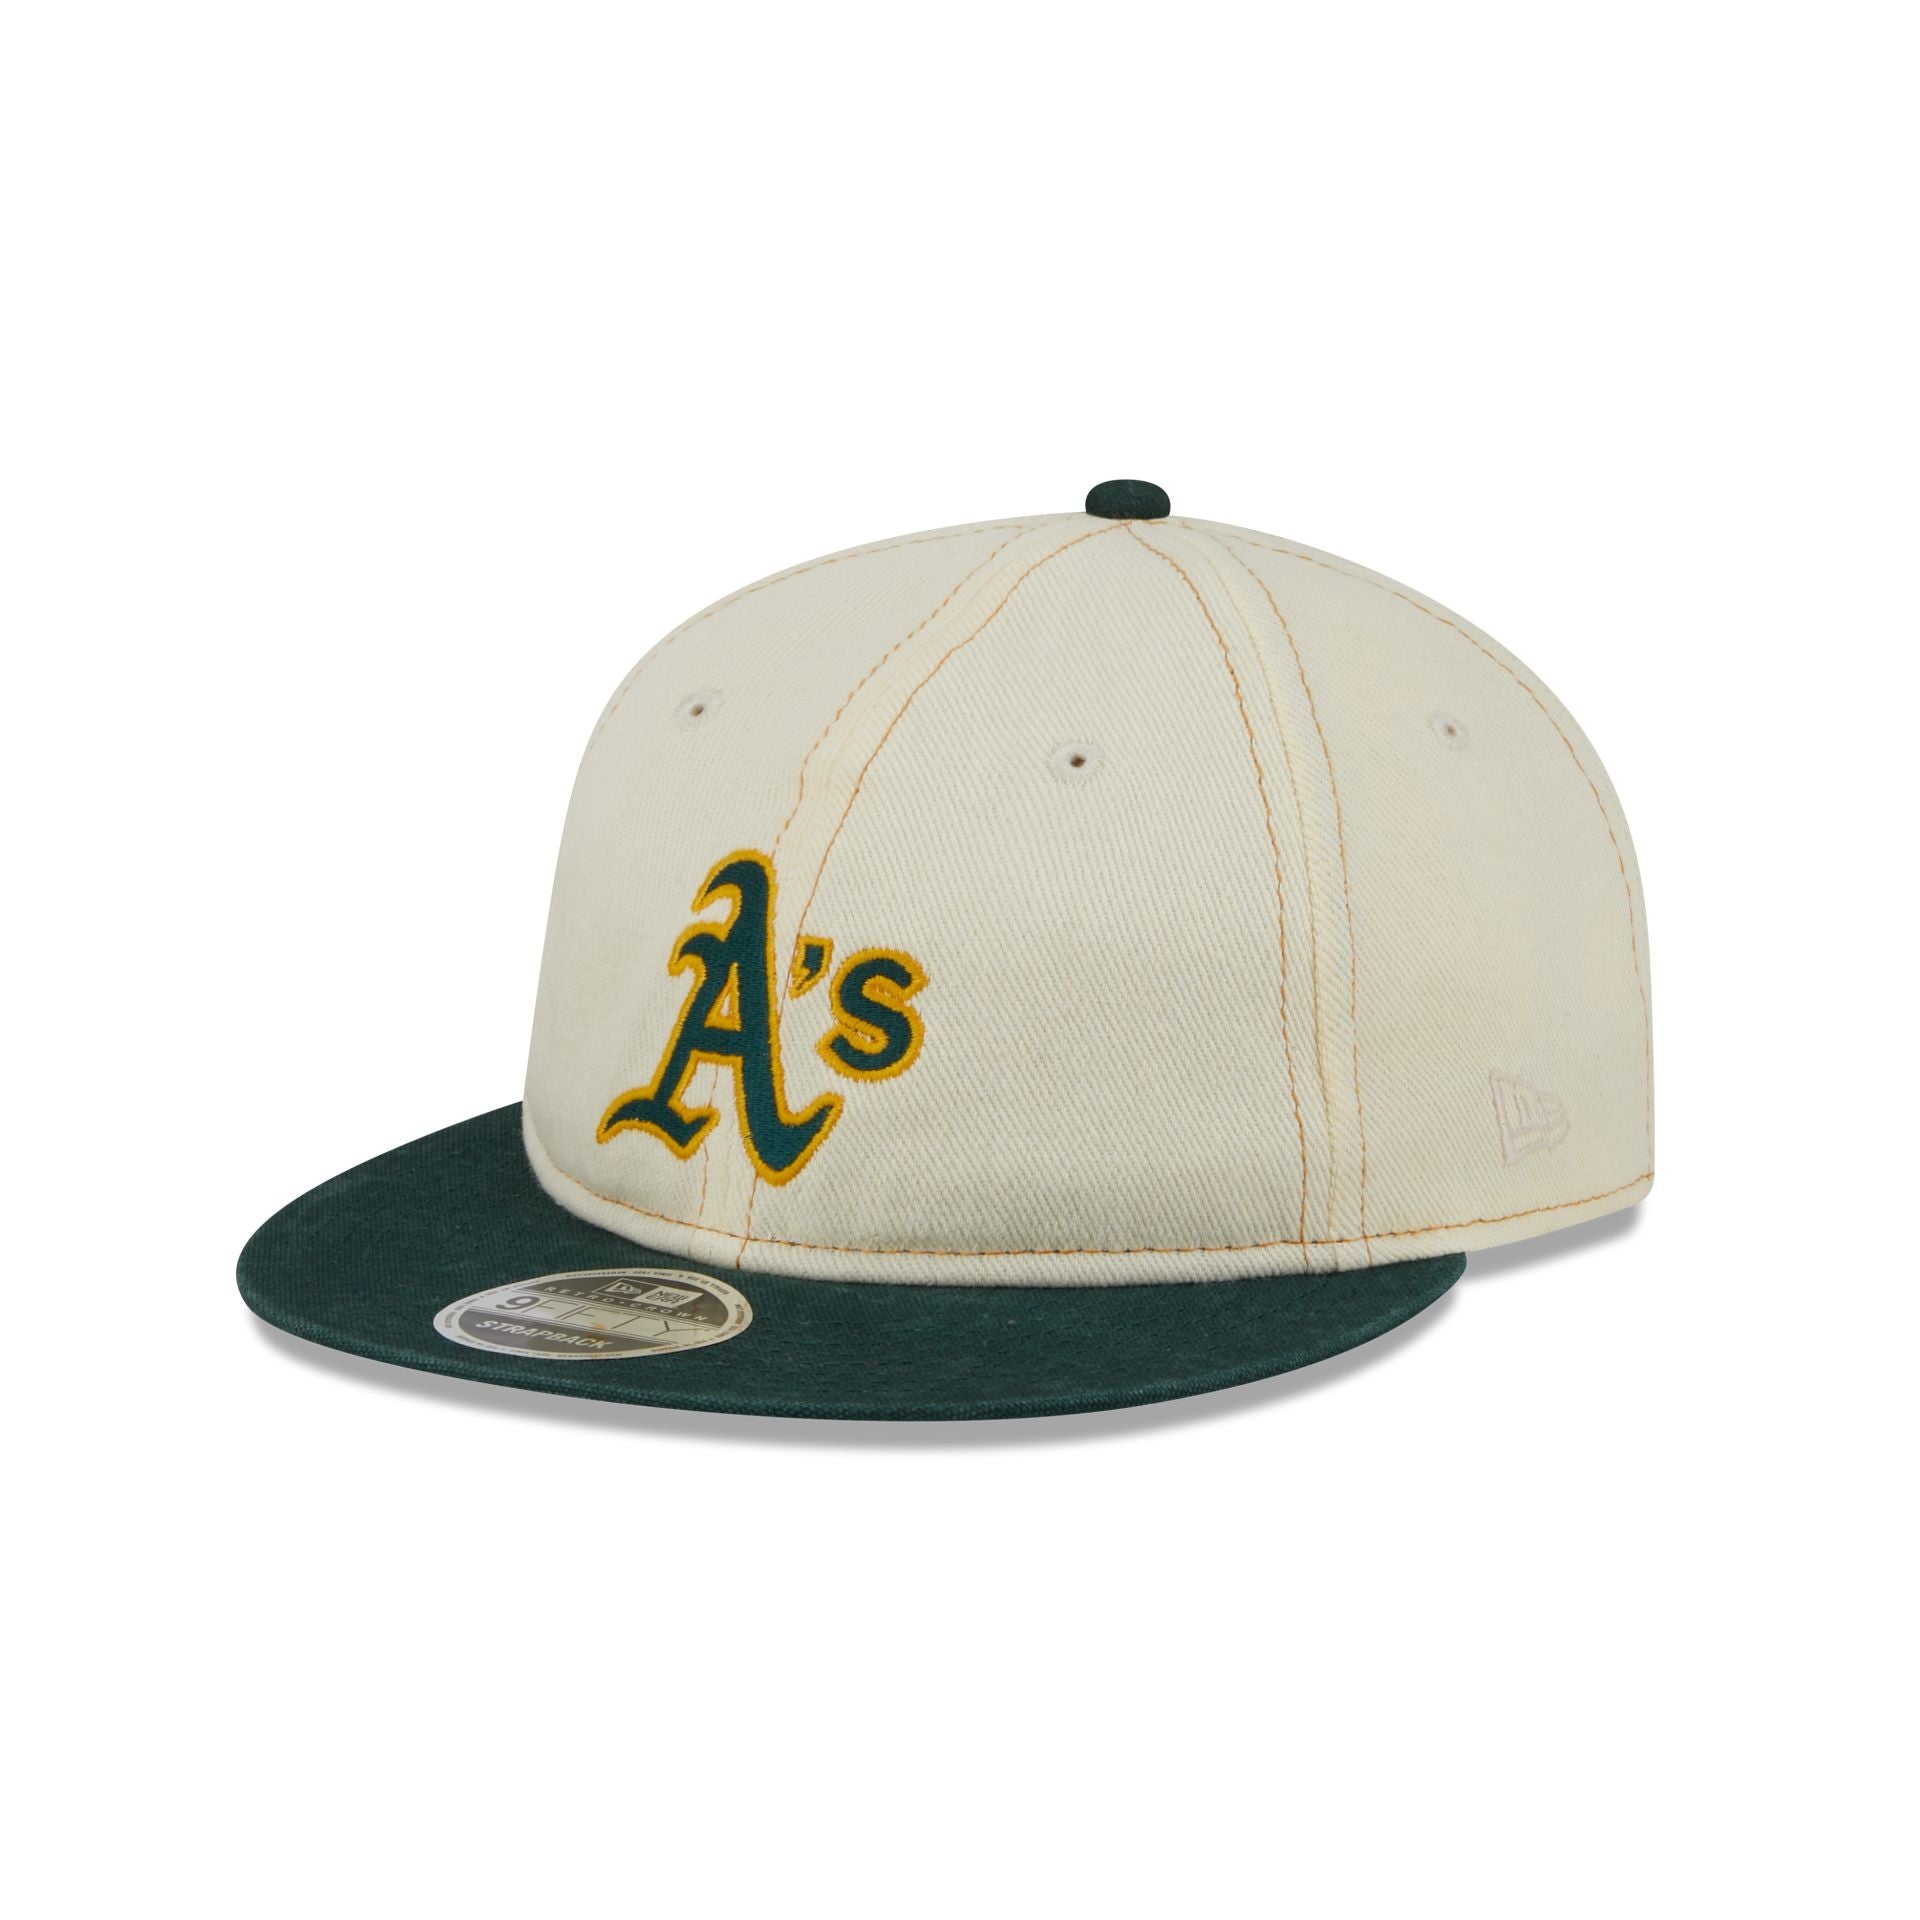 Men's Nike Green/Gold Oakland Athletics Cooperstown Collection Rewind Swooshflex Performance Hat Size: Large/Extra Large